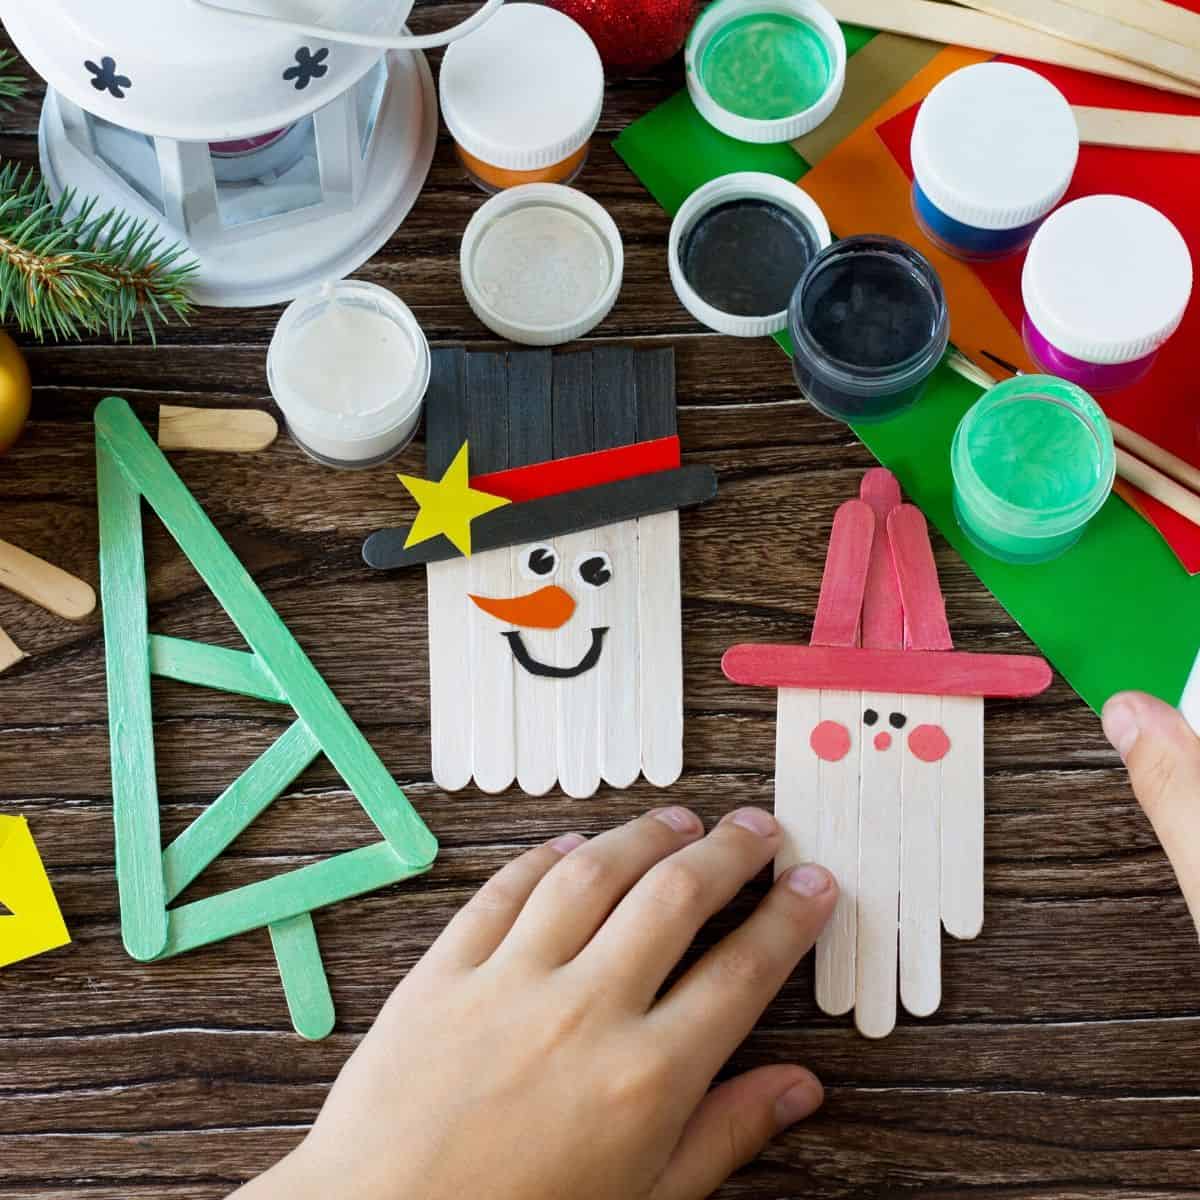 Christmas crafts made with popsicle sticks